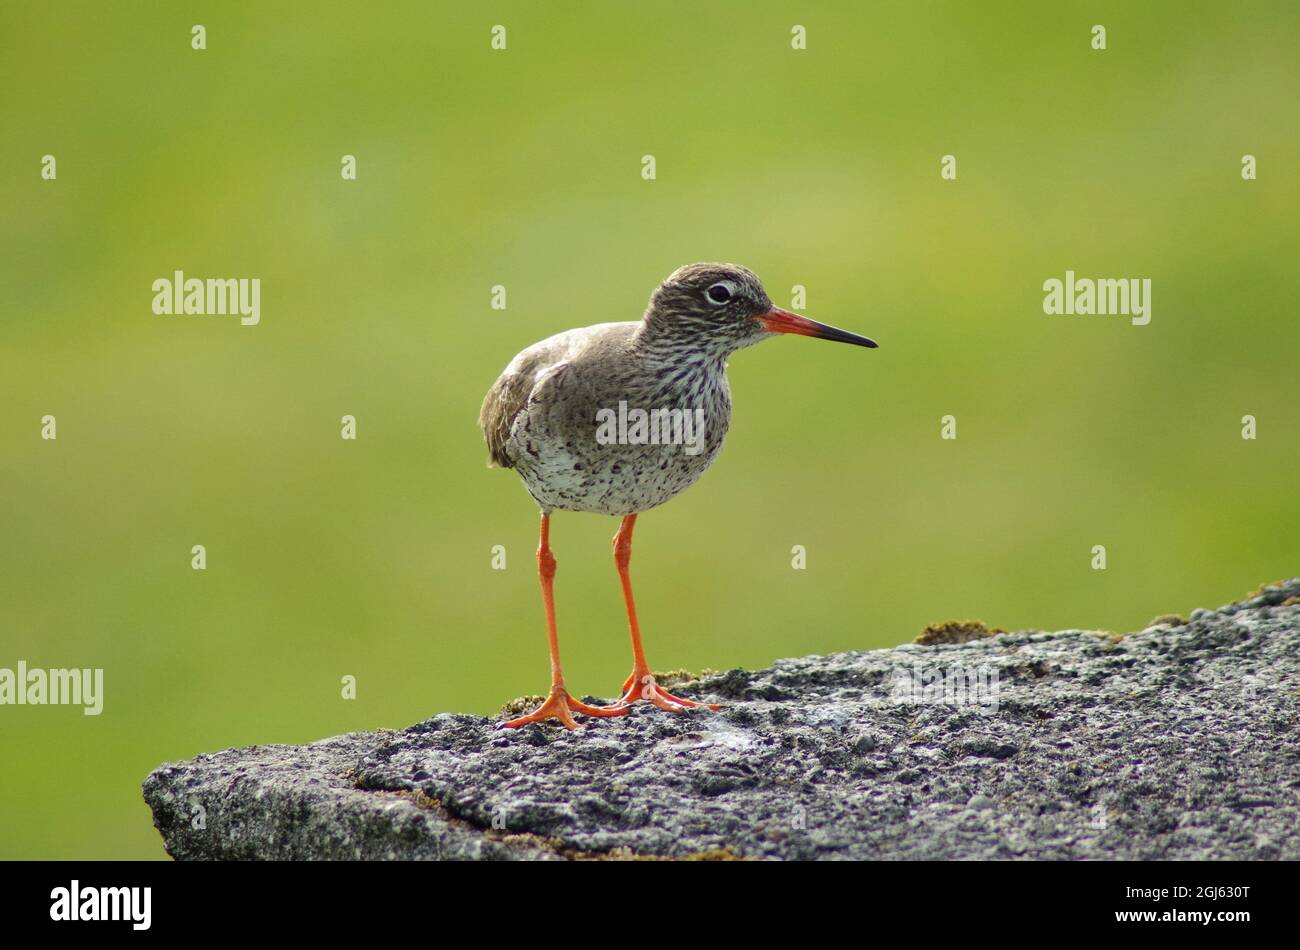 Common redshank hopping around in Iceland on gray rock, isolated on a green background. Stock Photo